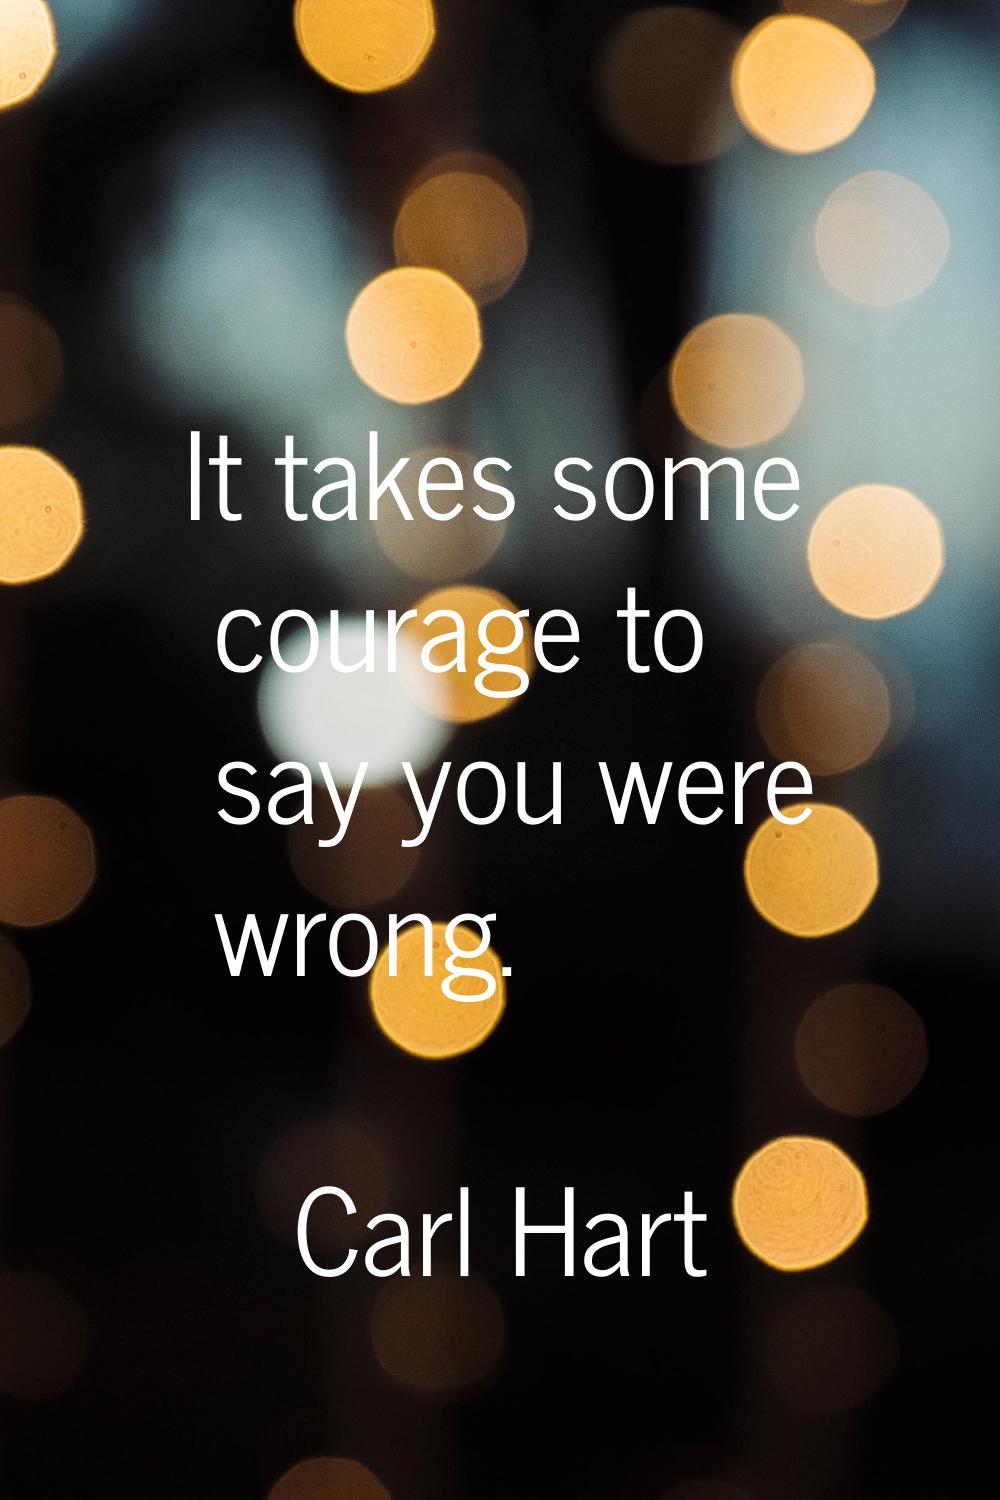 It takes some courage to say you were wrong.